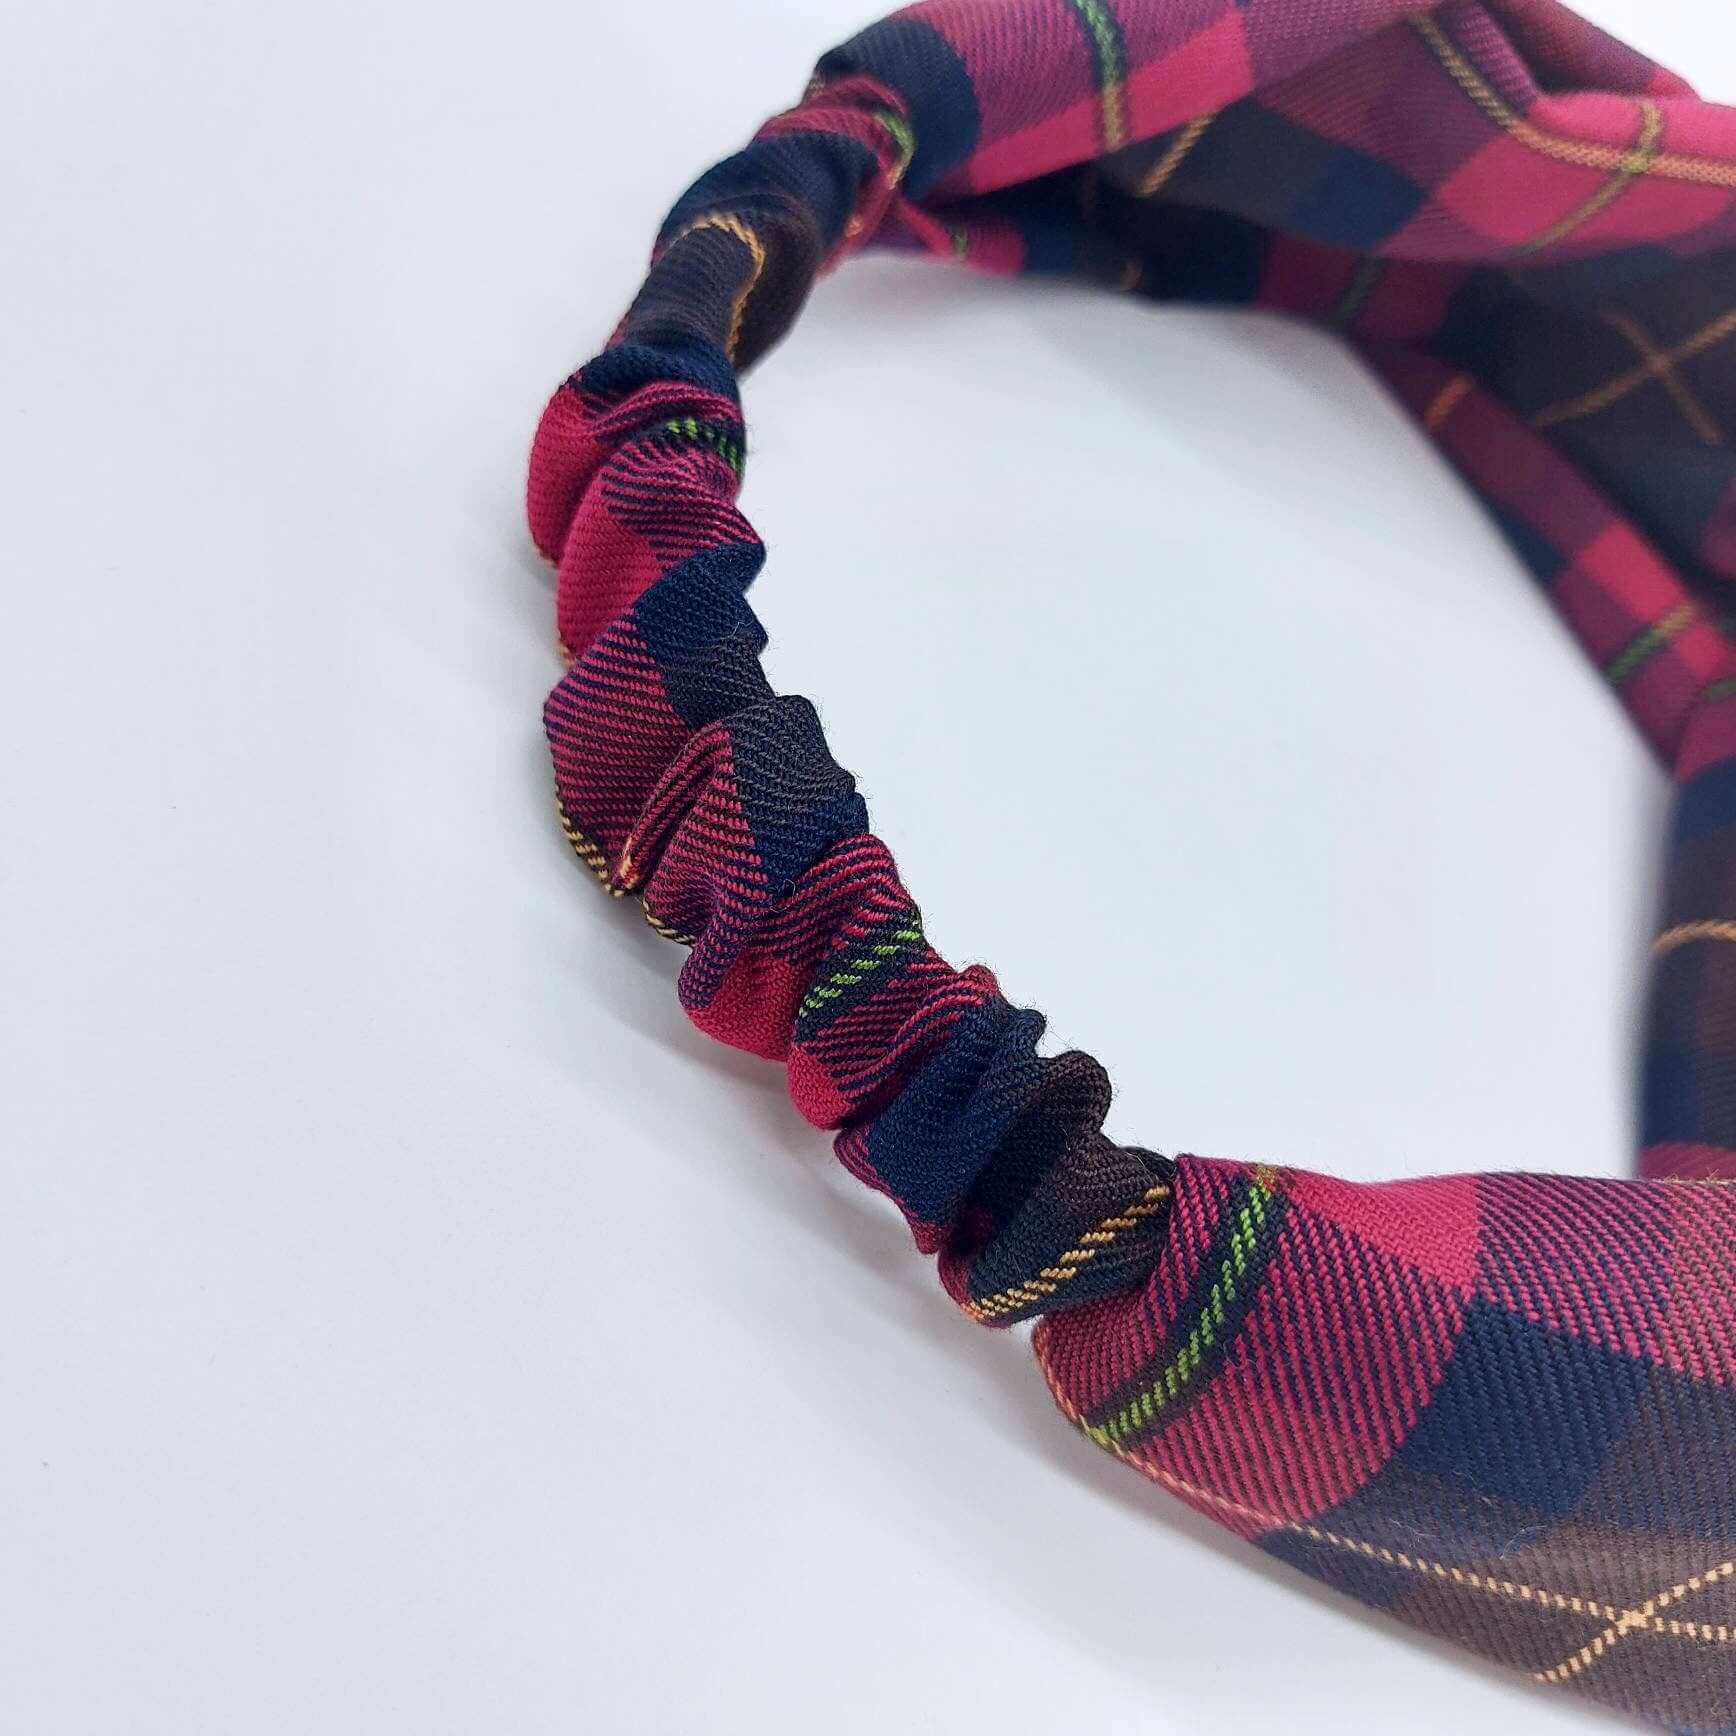 A soft, cranberry red, tartan, plaid, check, elasticated fabric headband, with a turban twist design at the front.